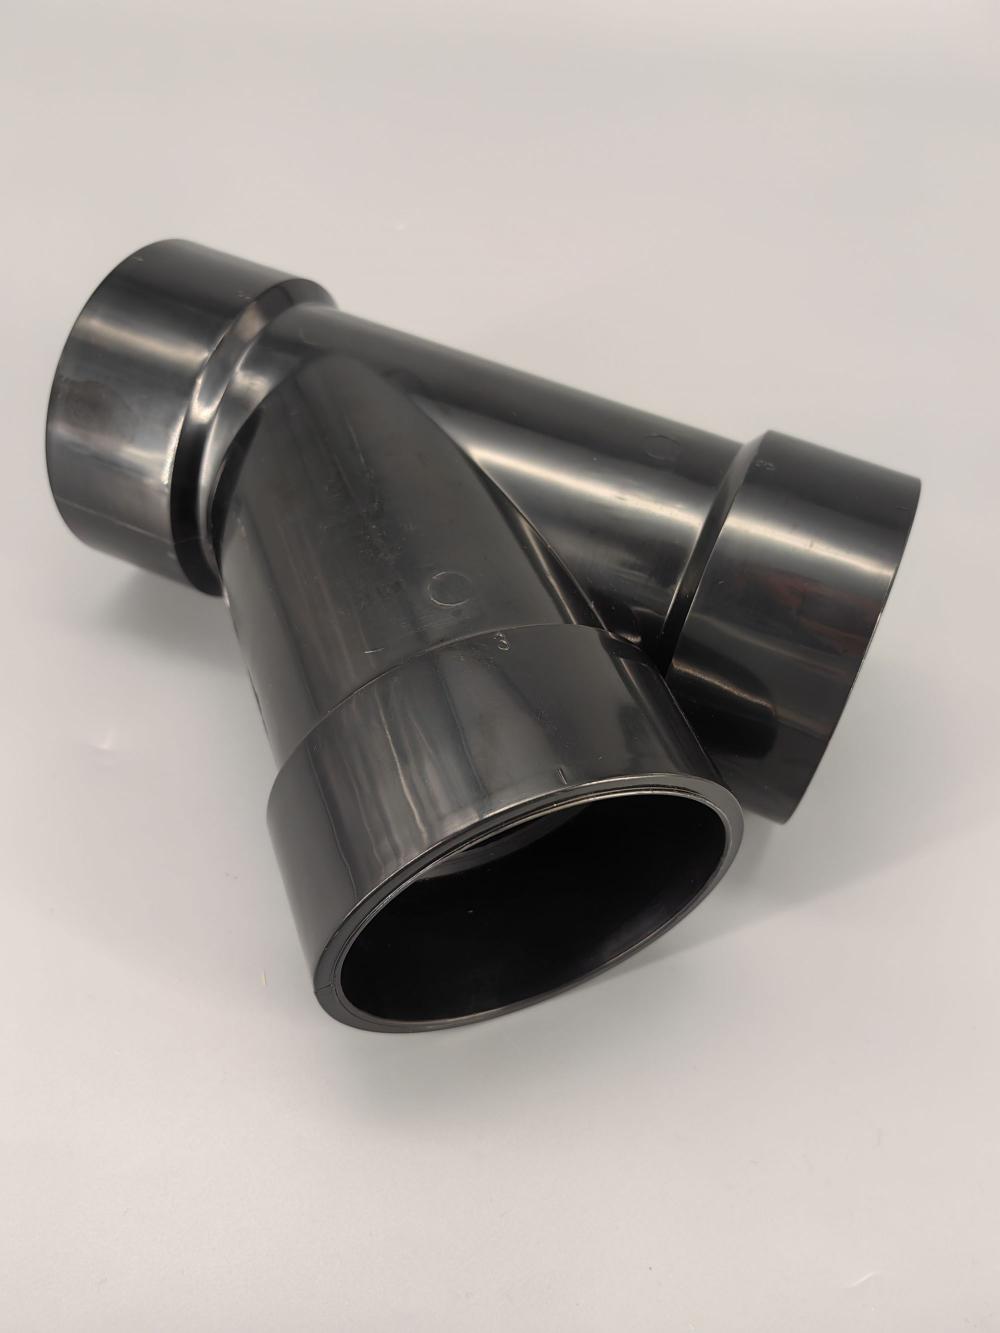 ABS pipe fittings 3 inch WYE